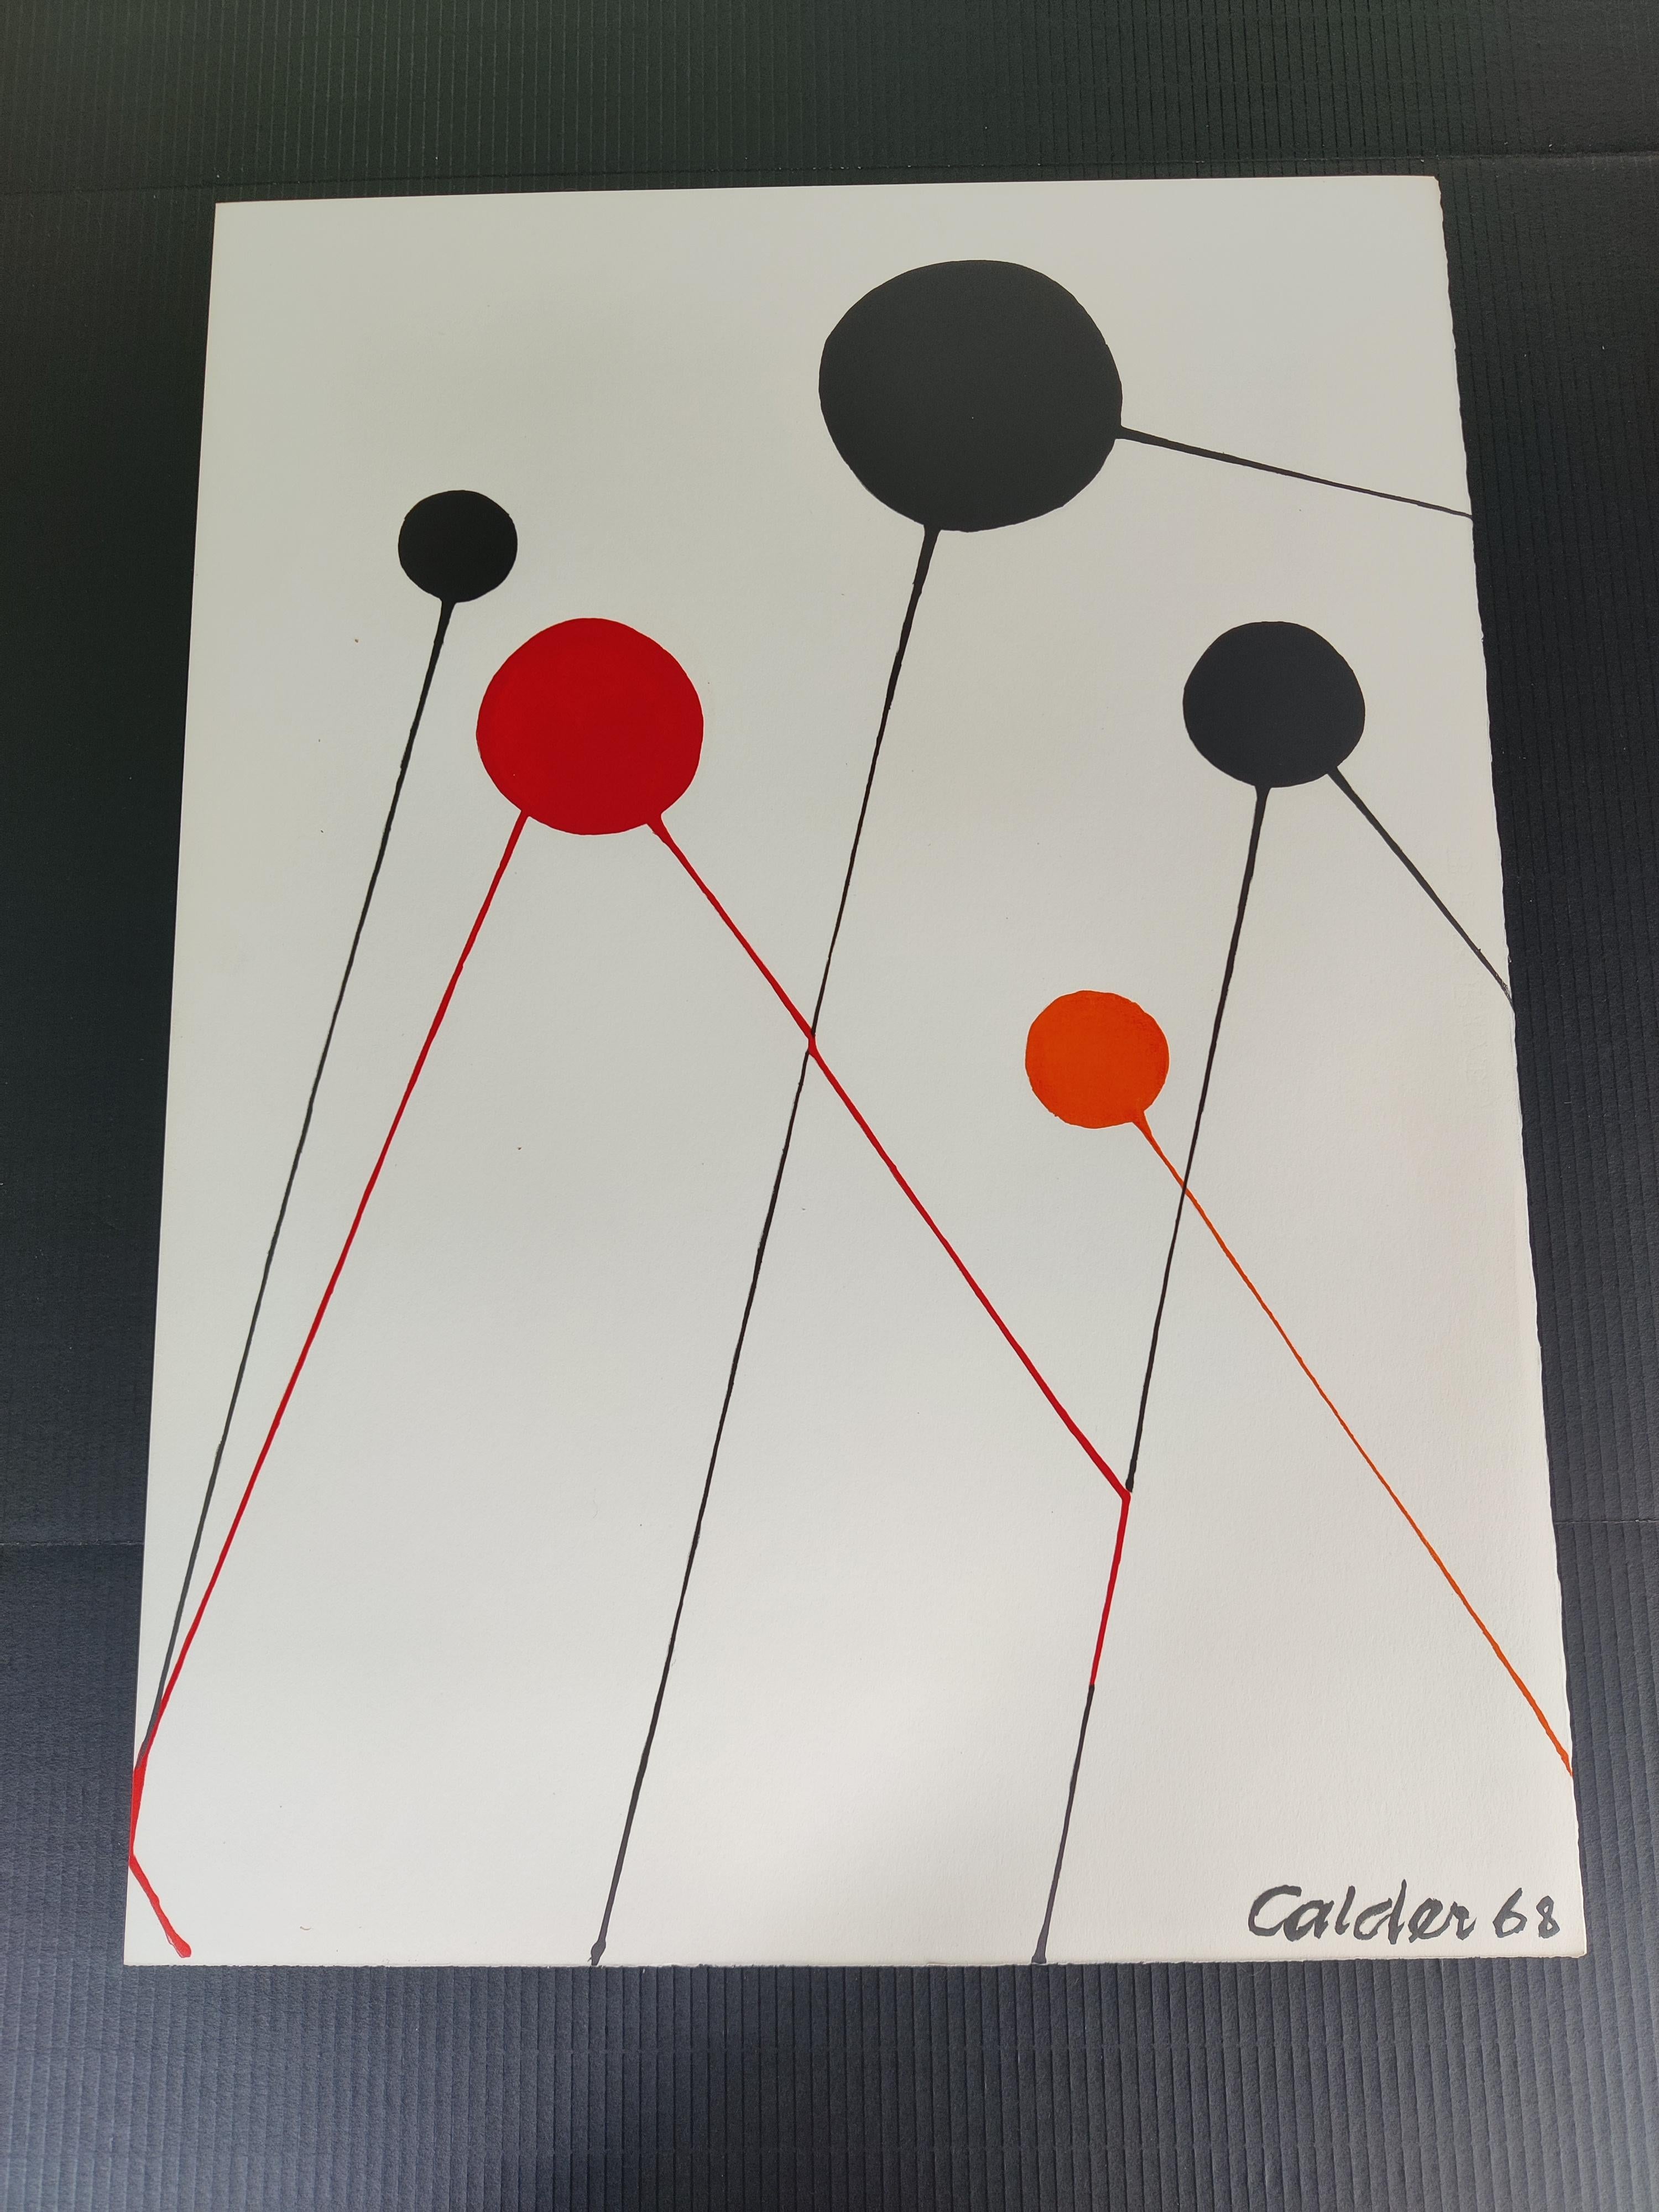 Alexander Calder 68 Lithograph Balloons
Signed in the plate
Bought in gallery in Chicago in the late 1970s. 
Never framed. 